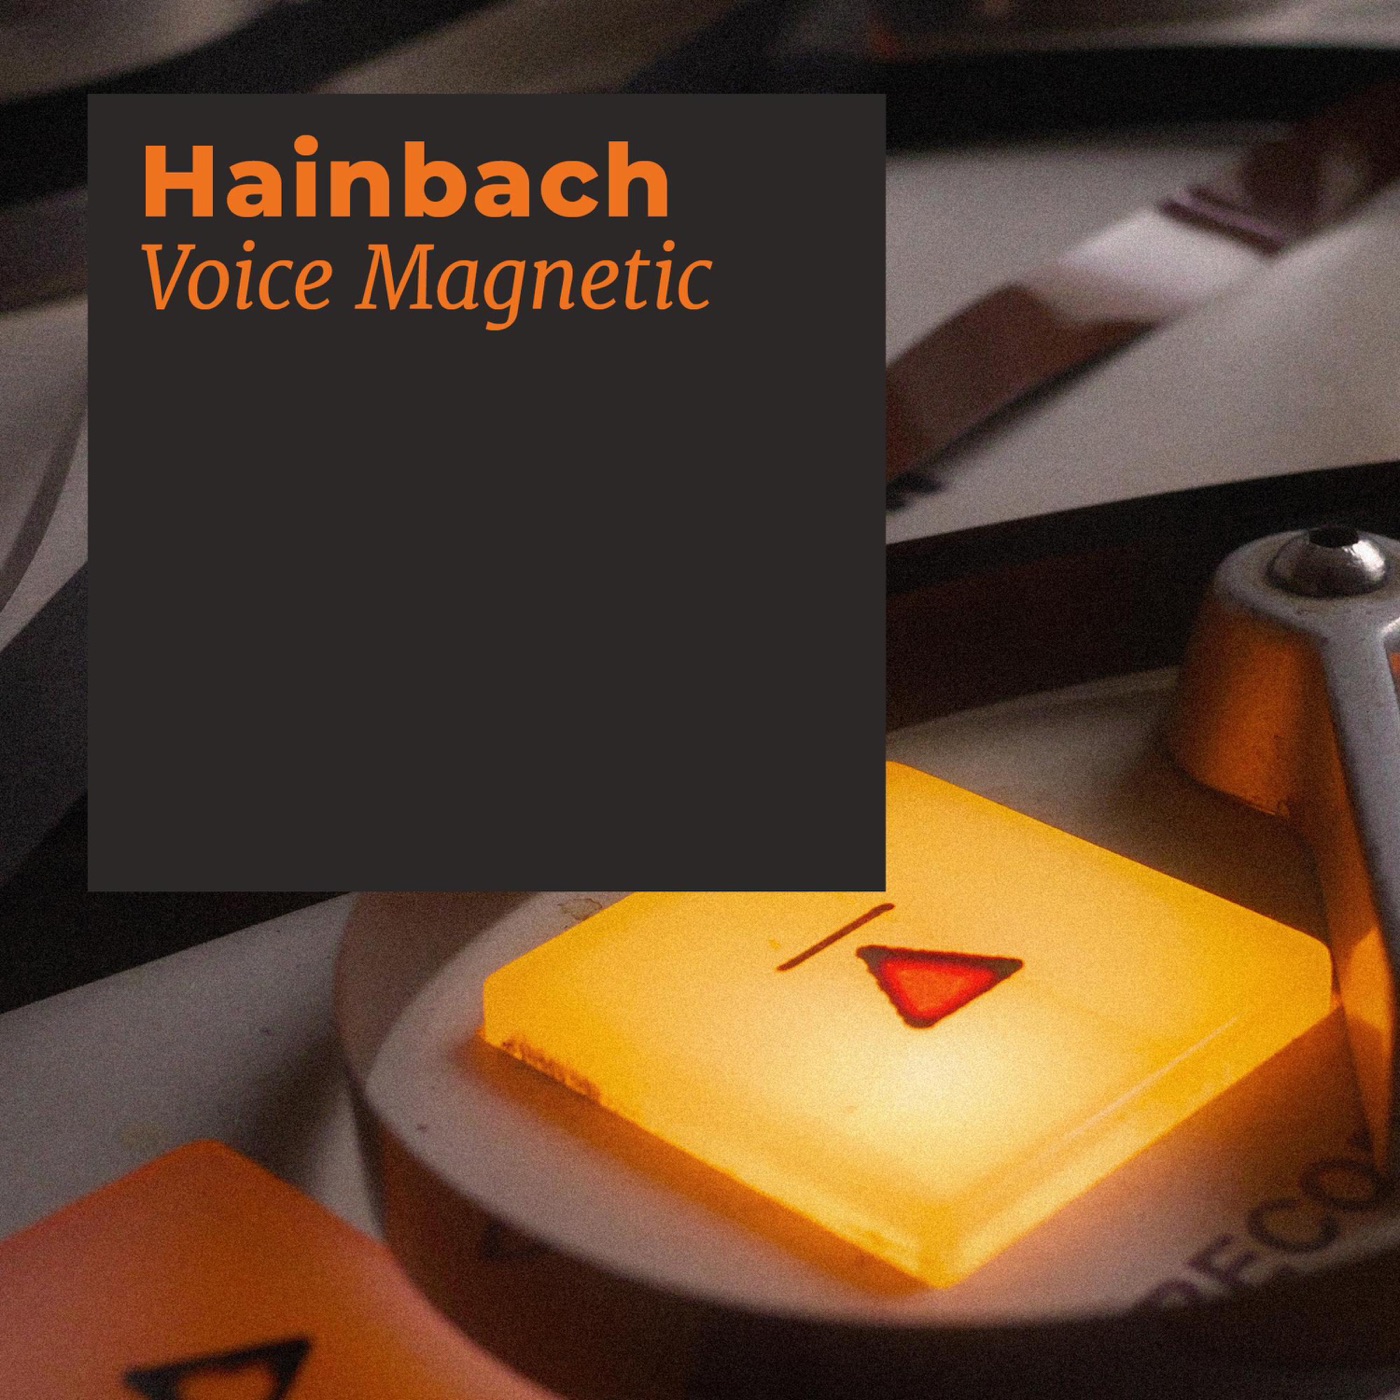 Voice Magnetic by Hainbach